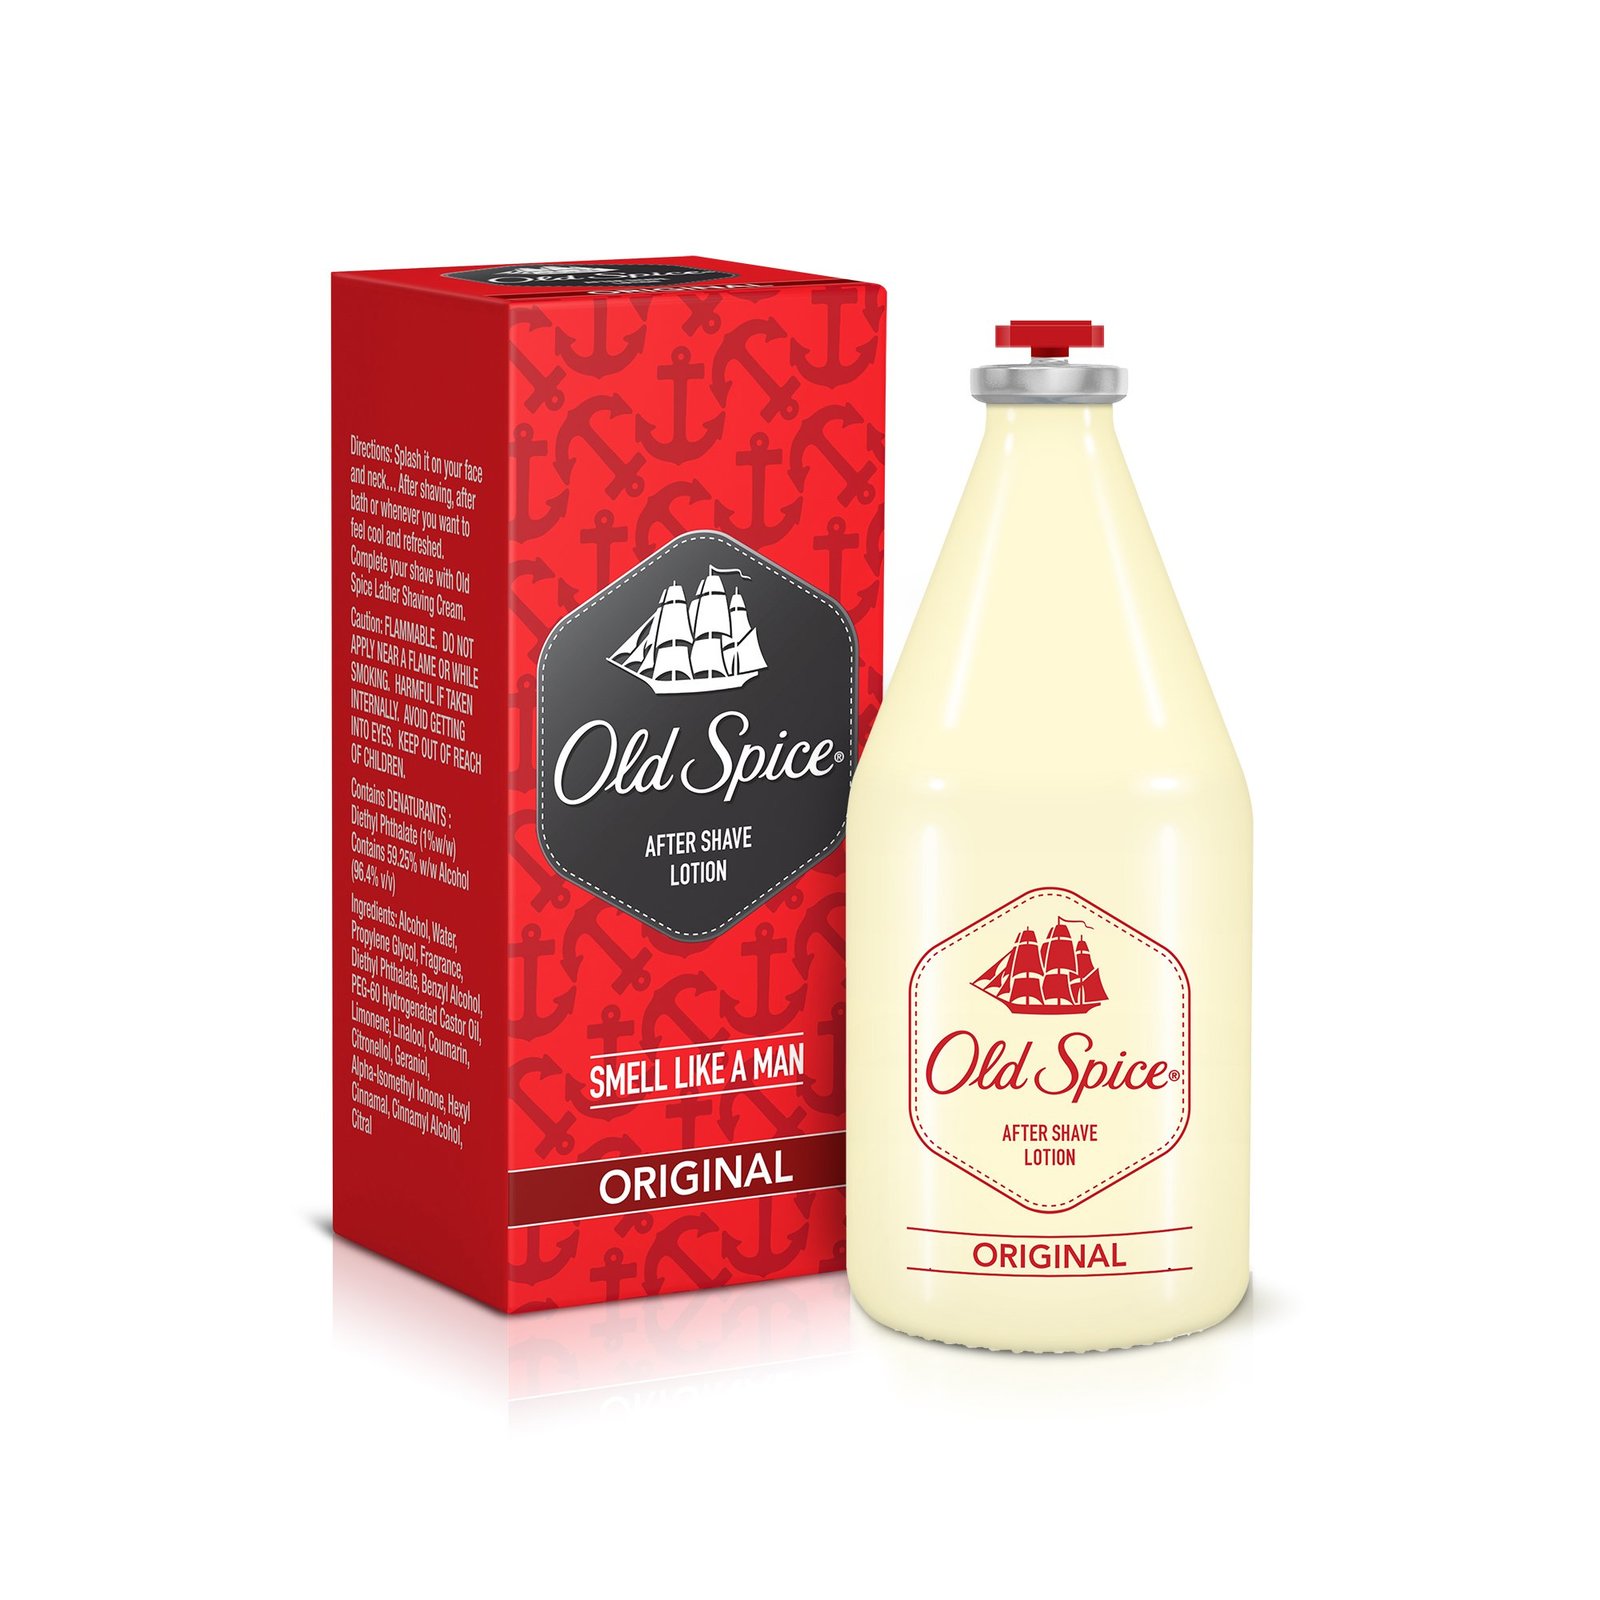 Old Spice After Shave Lotion Original - 150 ml - $14.44